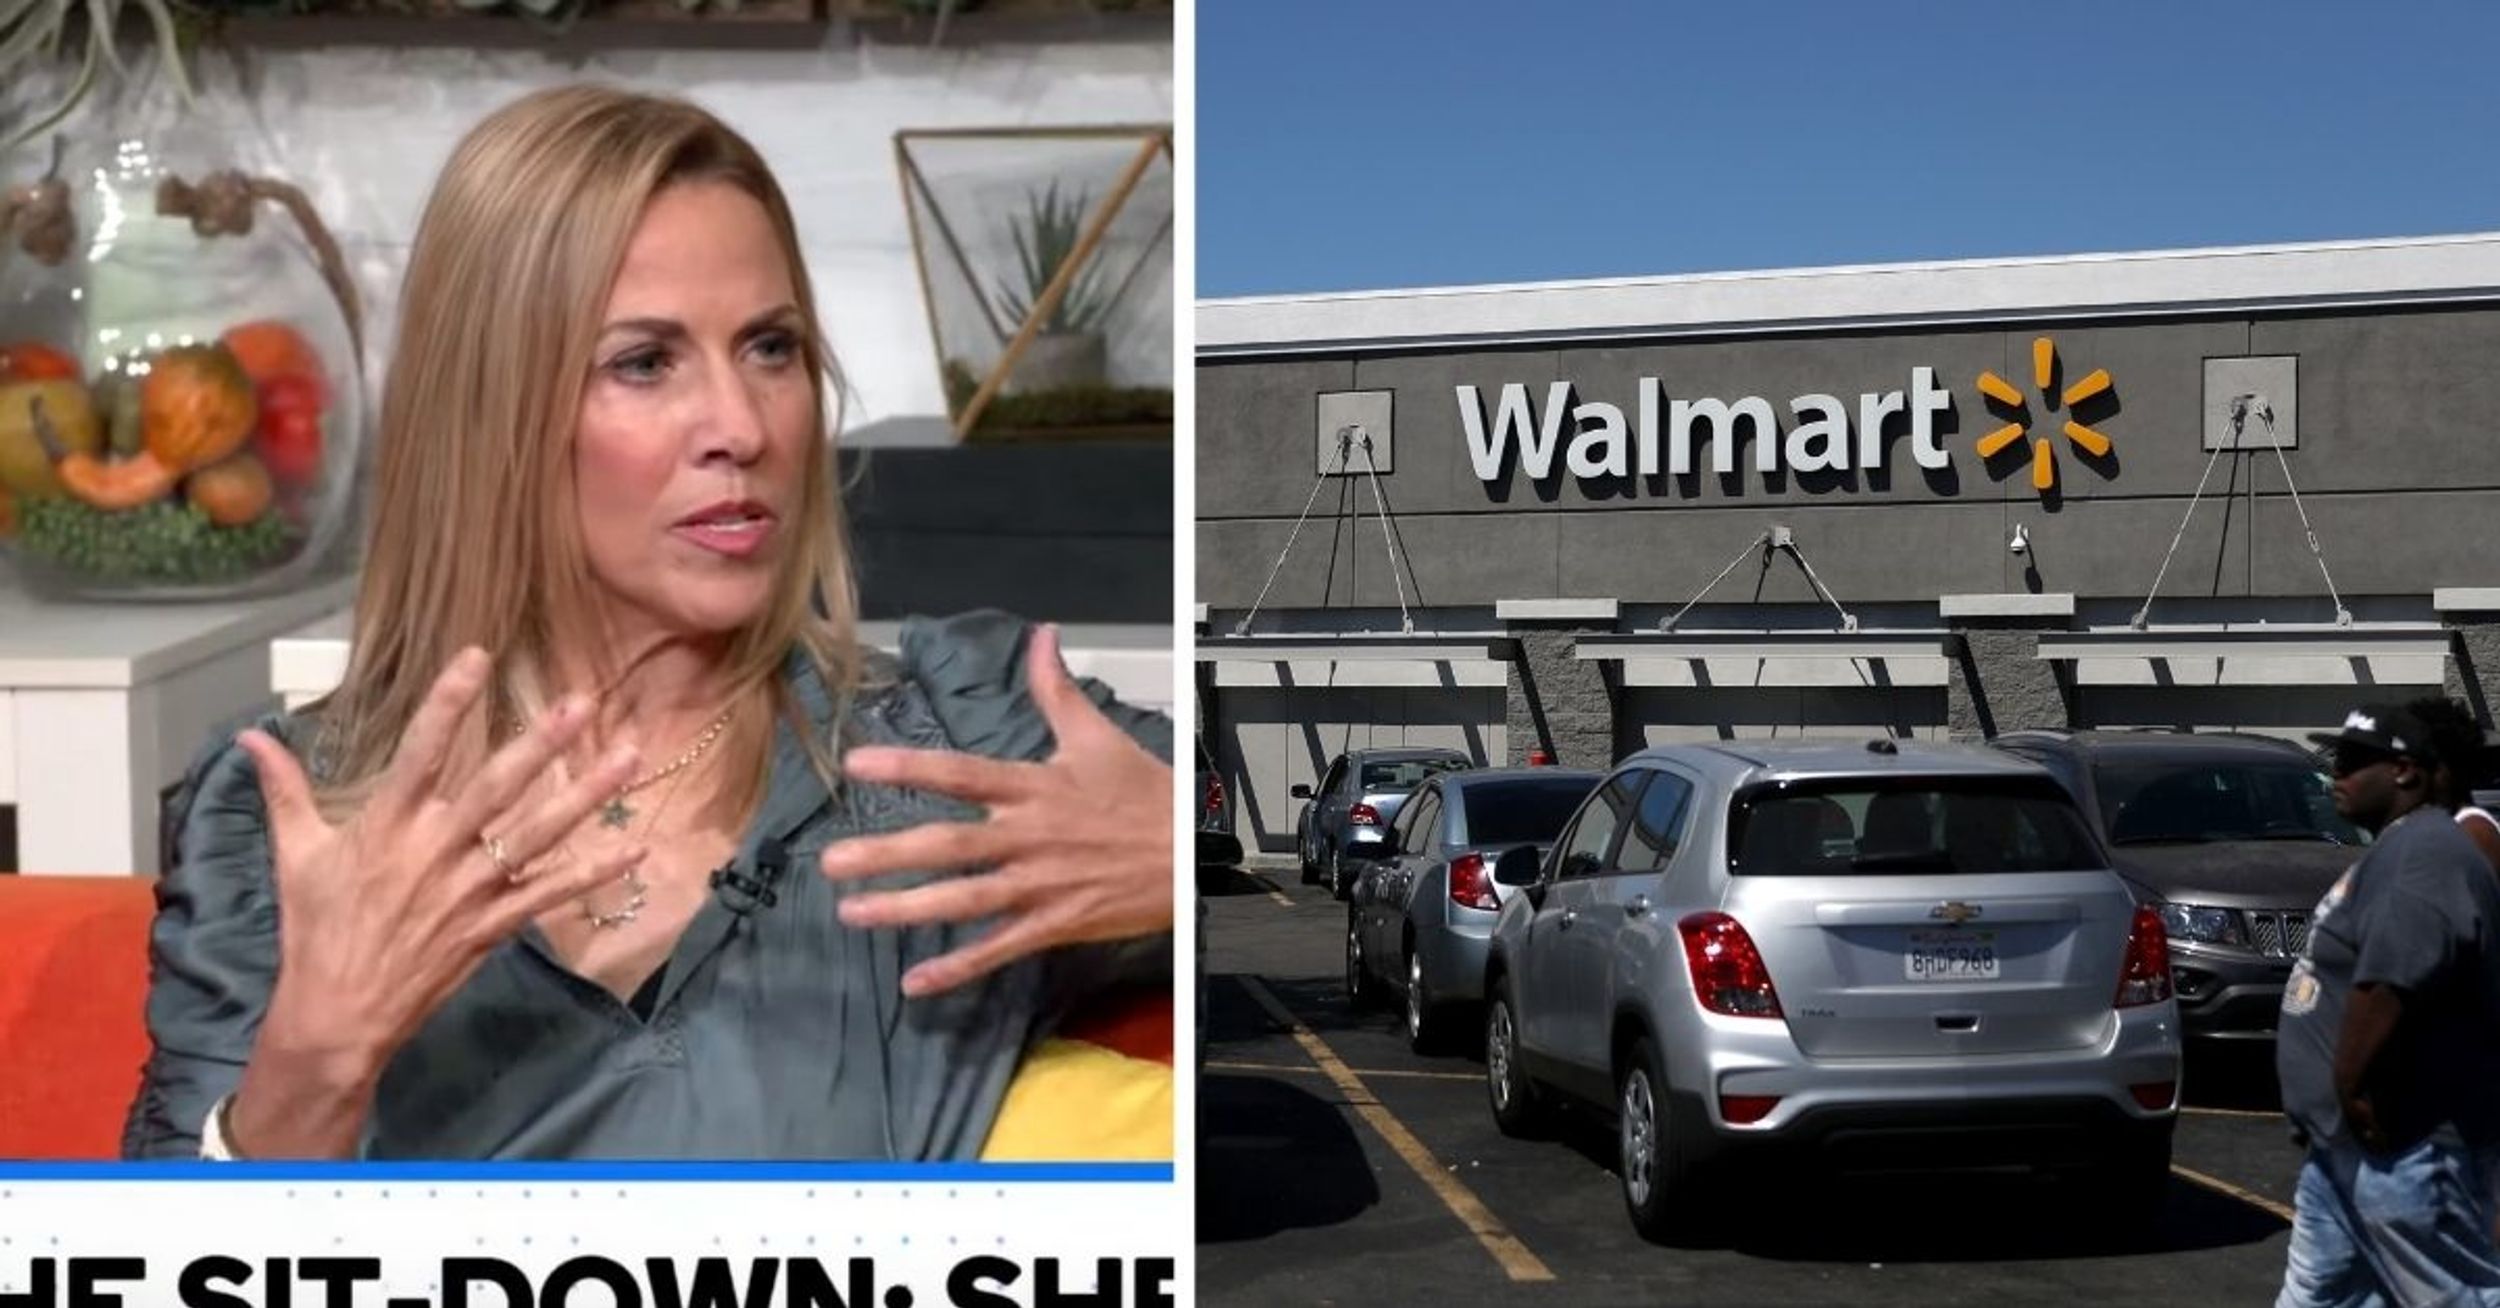 Sheryl Crow Praises Walmart 23 Years After They Banned Her Album For Song Criticizing Their Gun Sales